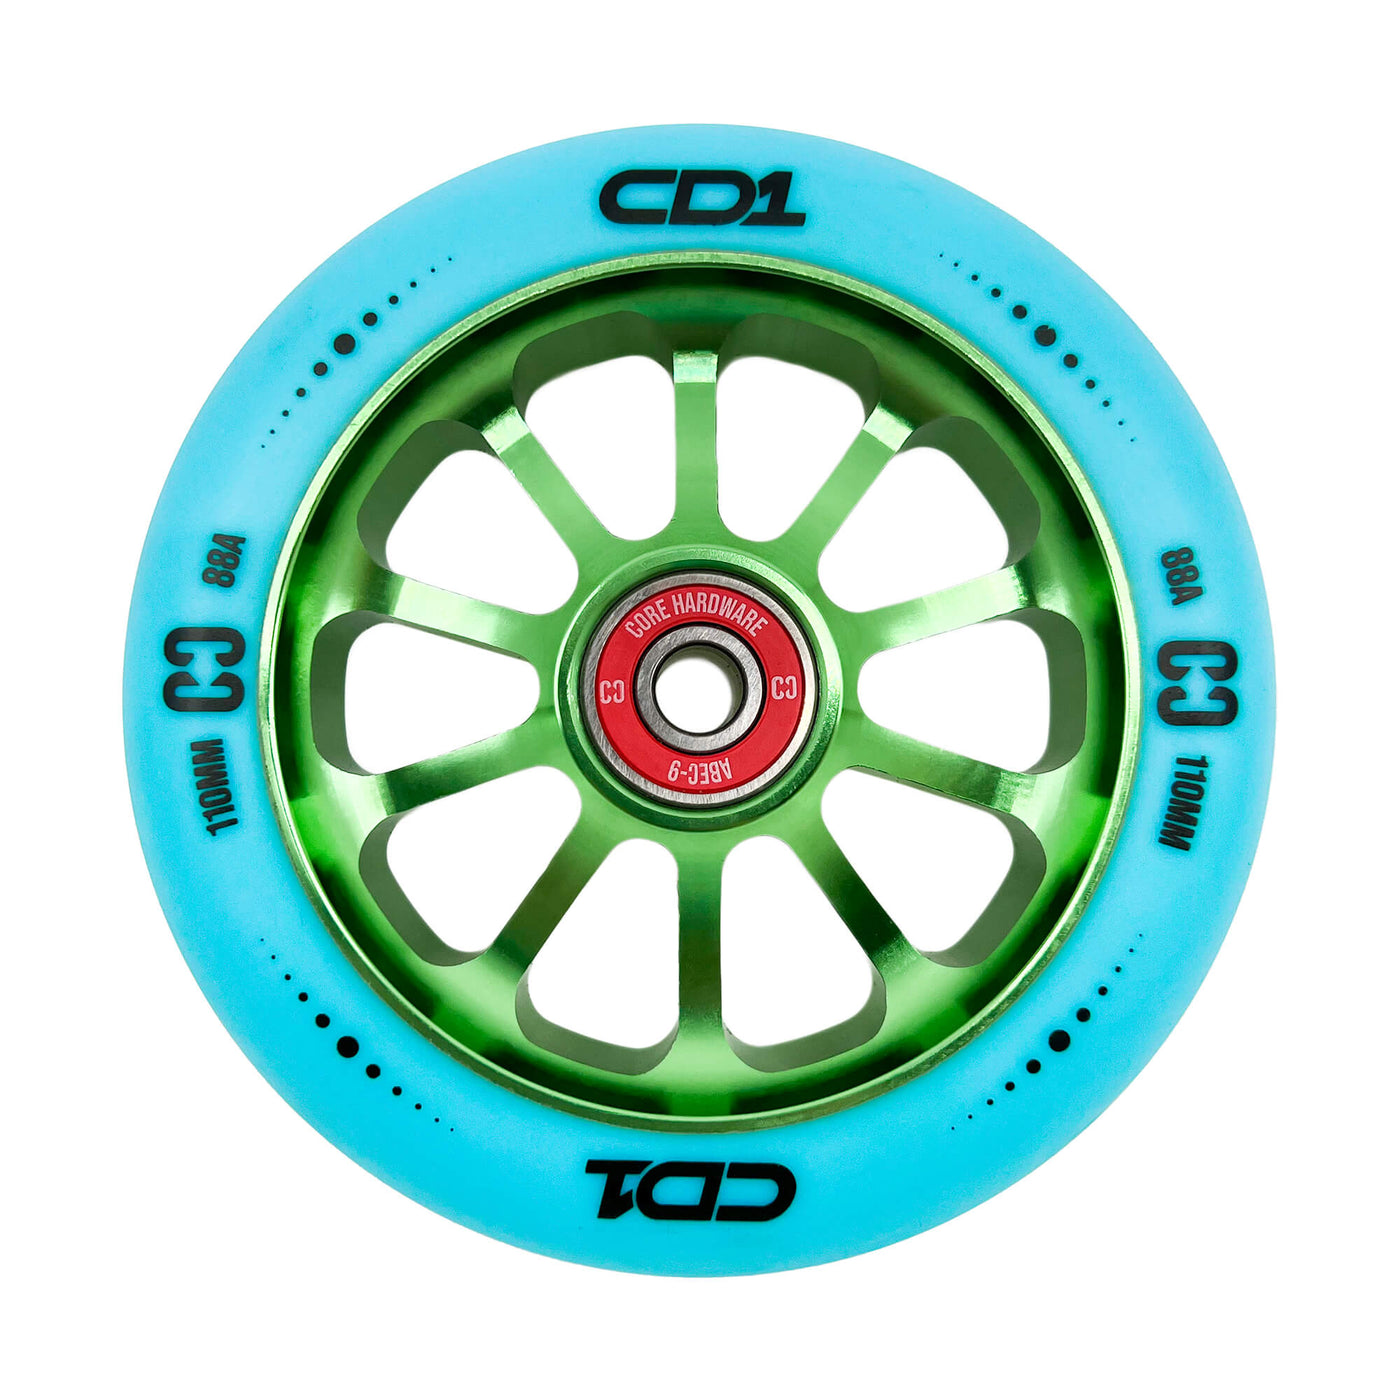 CORE CD1 Spoked Stunt Scooter Wheel 110mm -  Blue/Lime